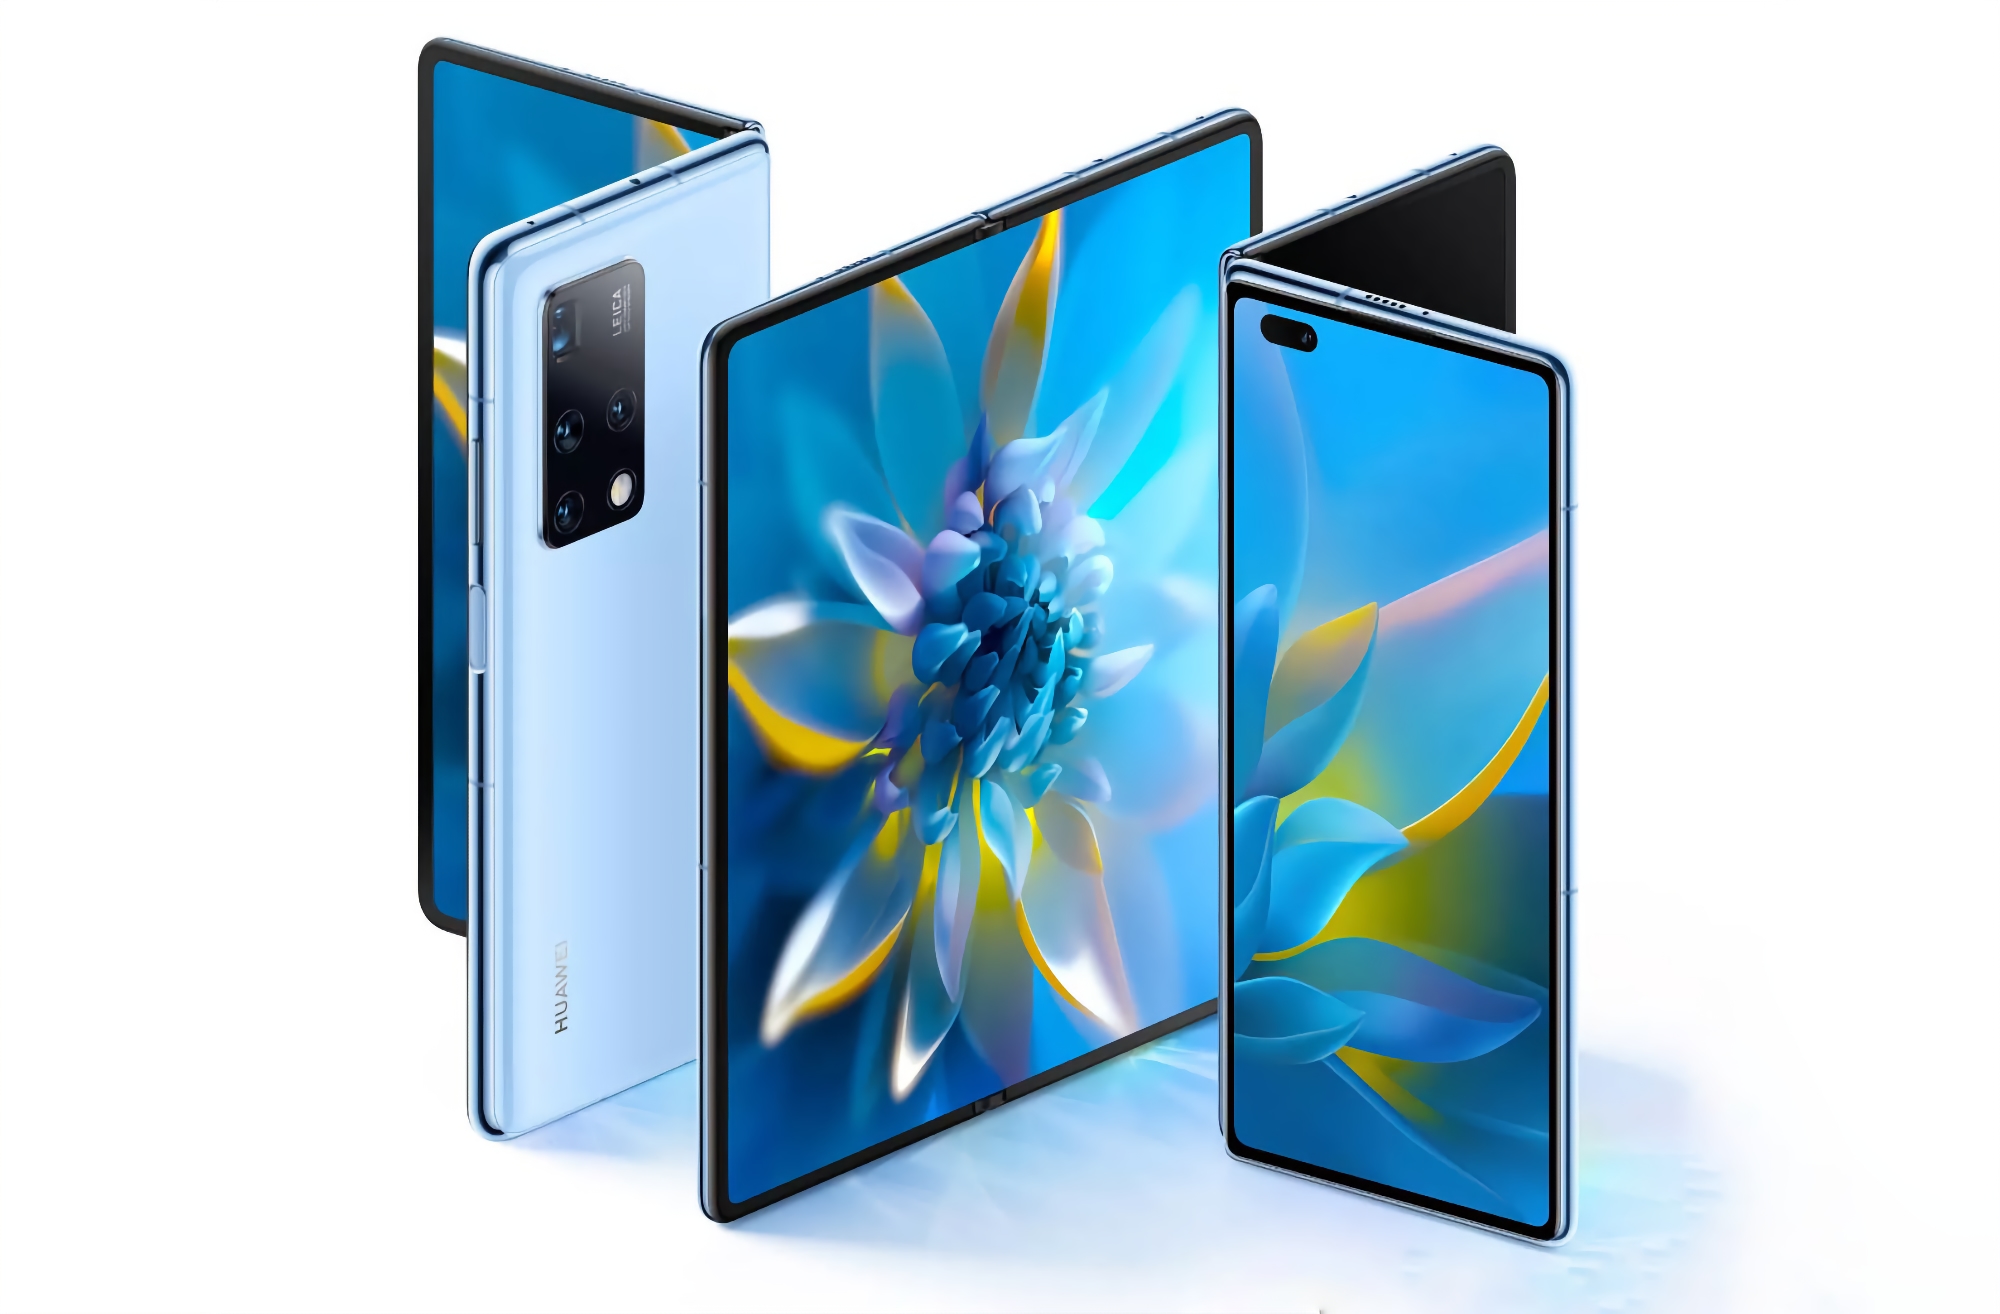 Insider: Huawei's next foldable smartphone will be released in February